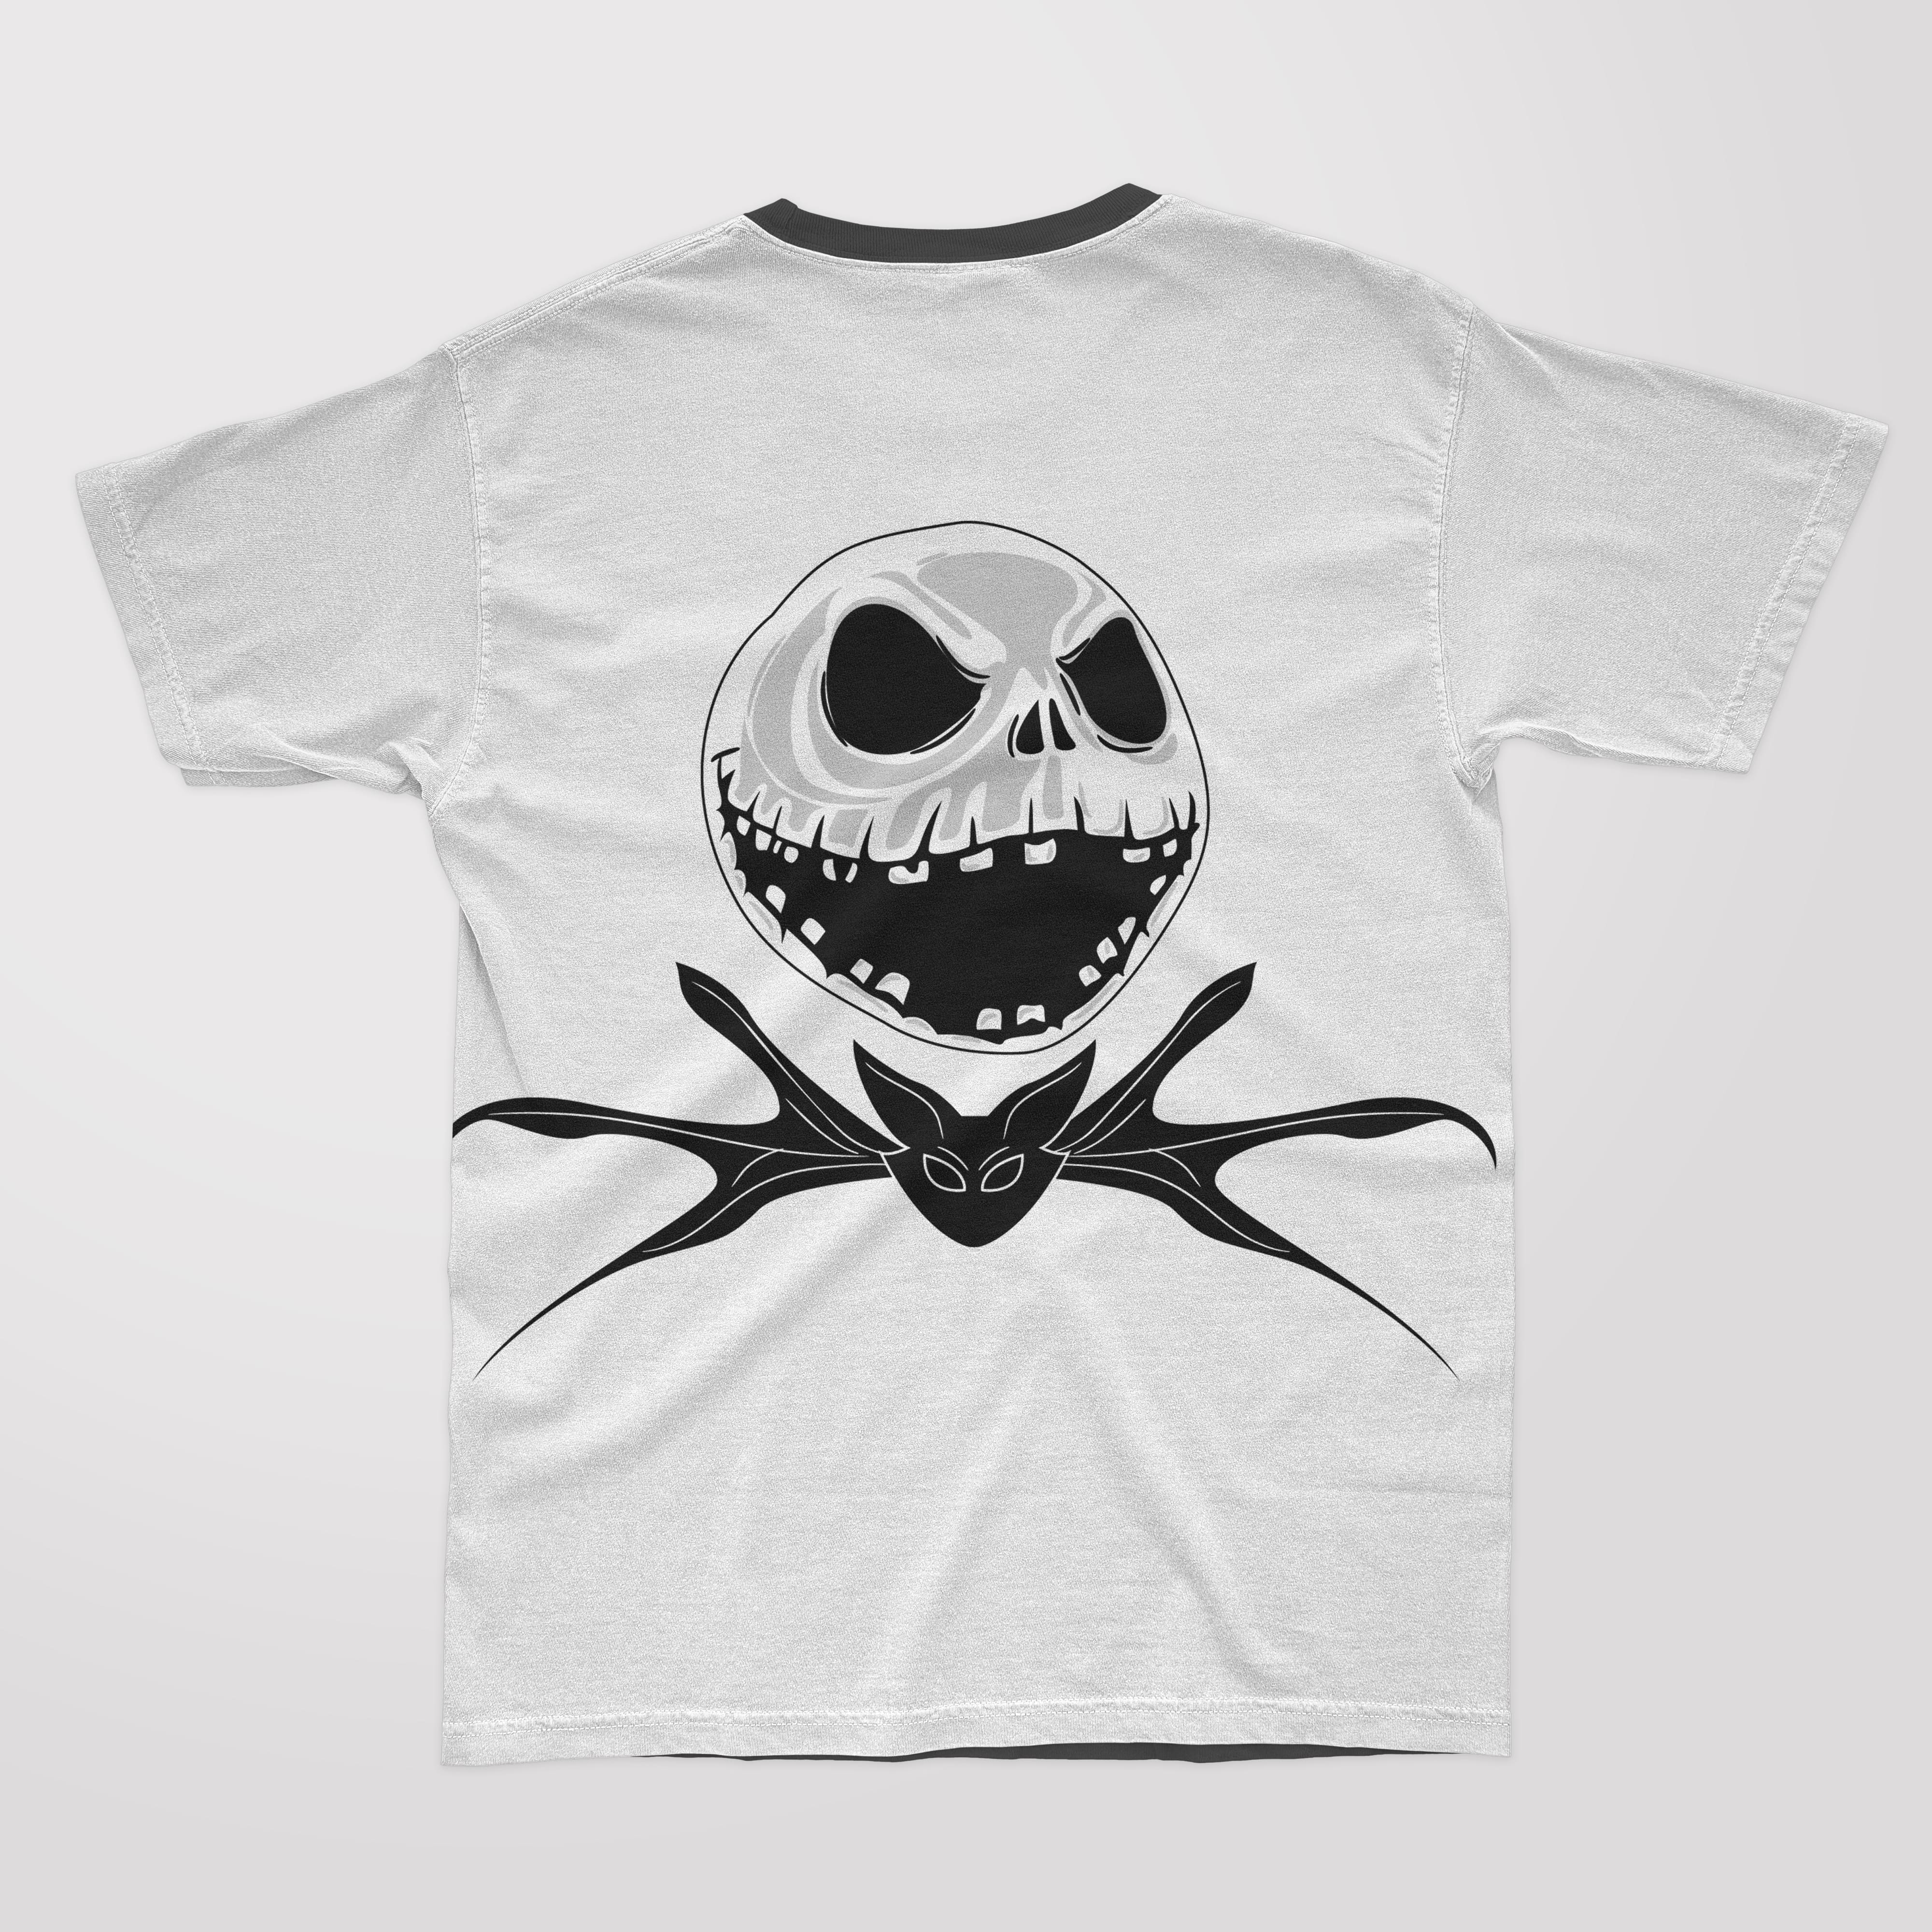 Black and white t-shirt with skellington and bat illustrations.